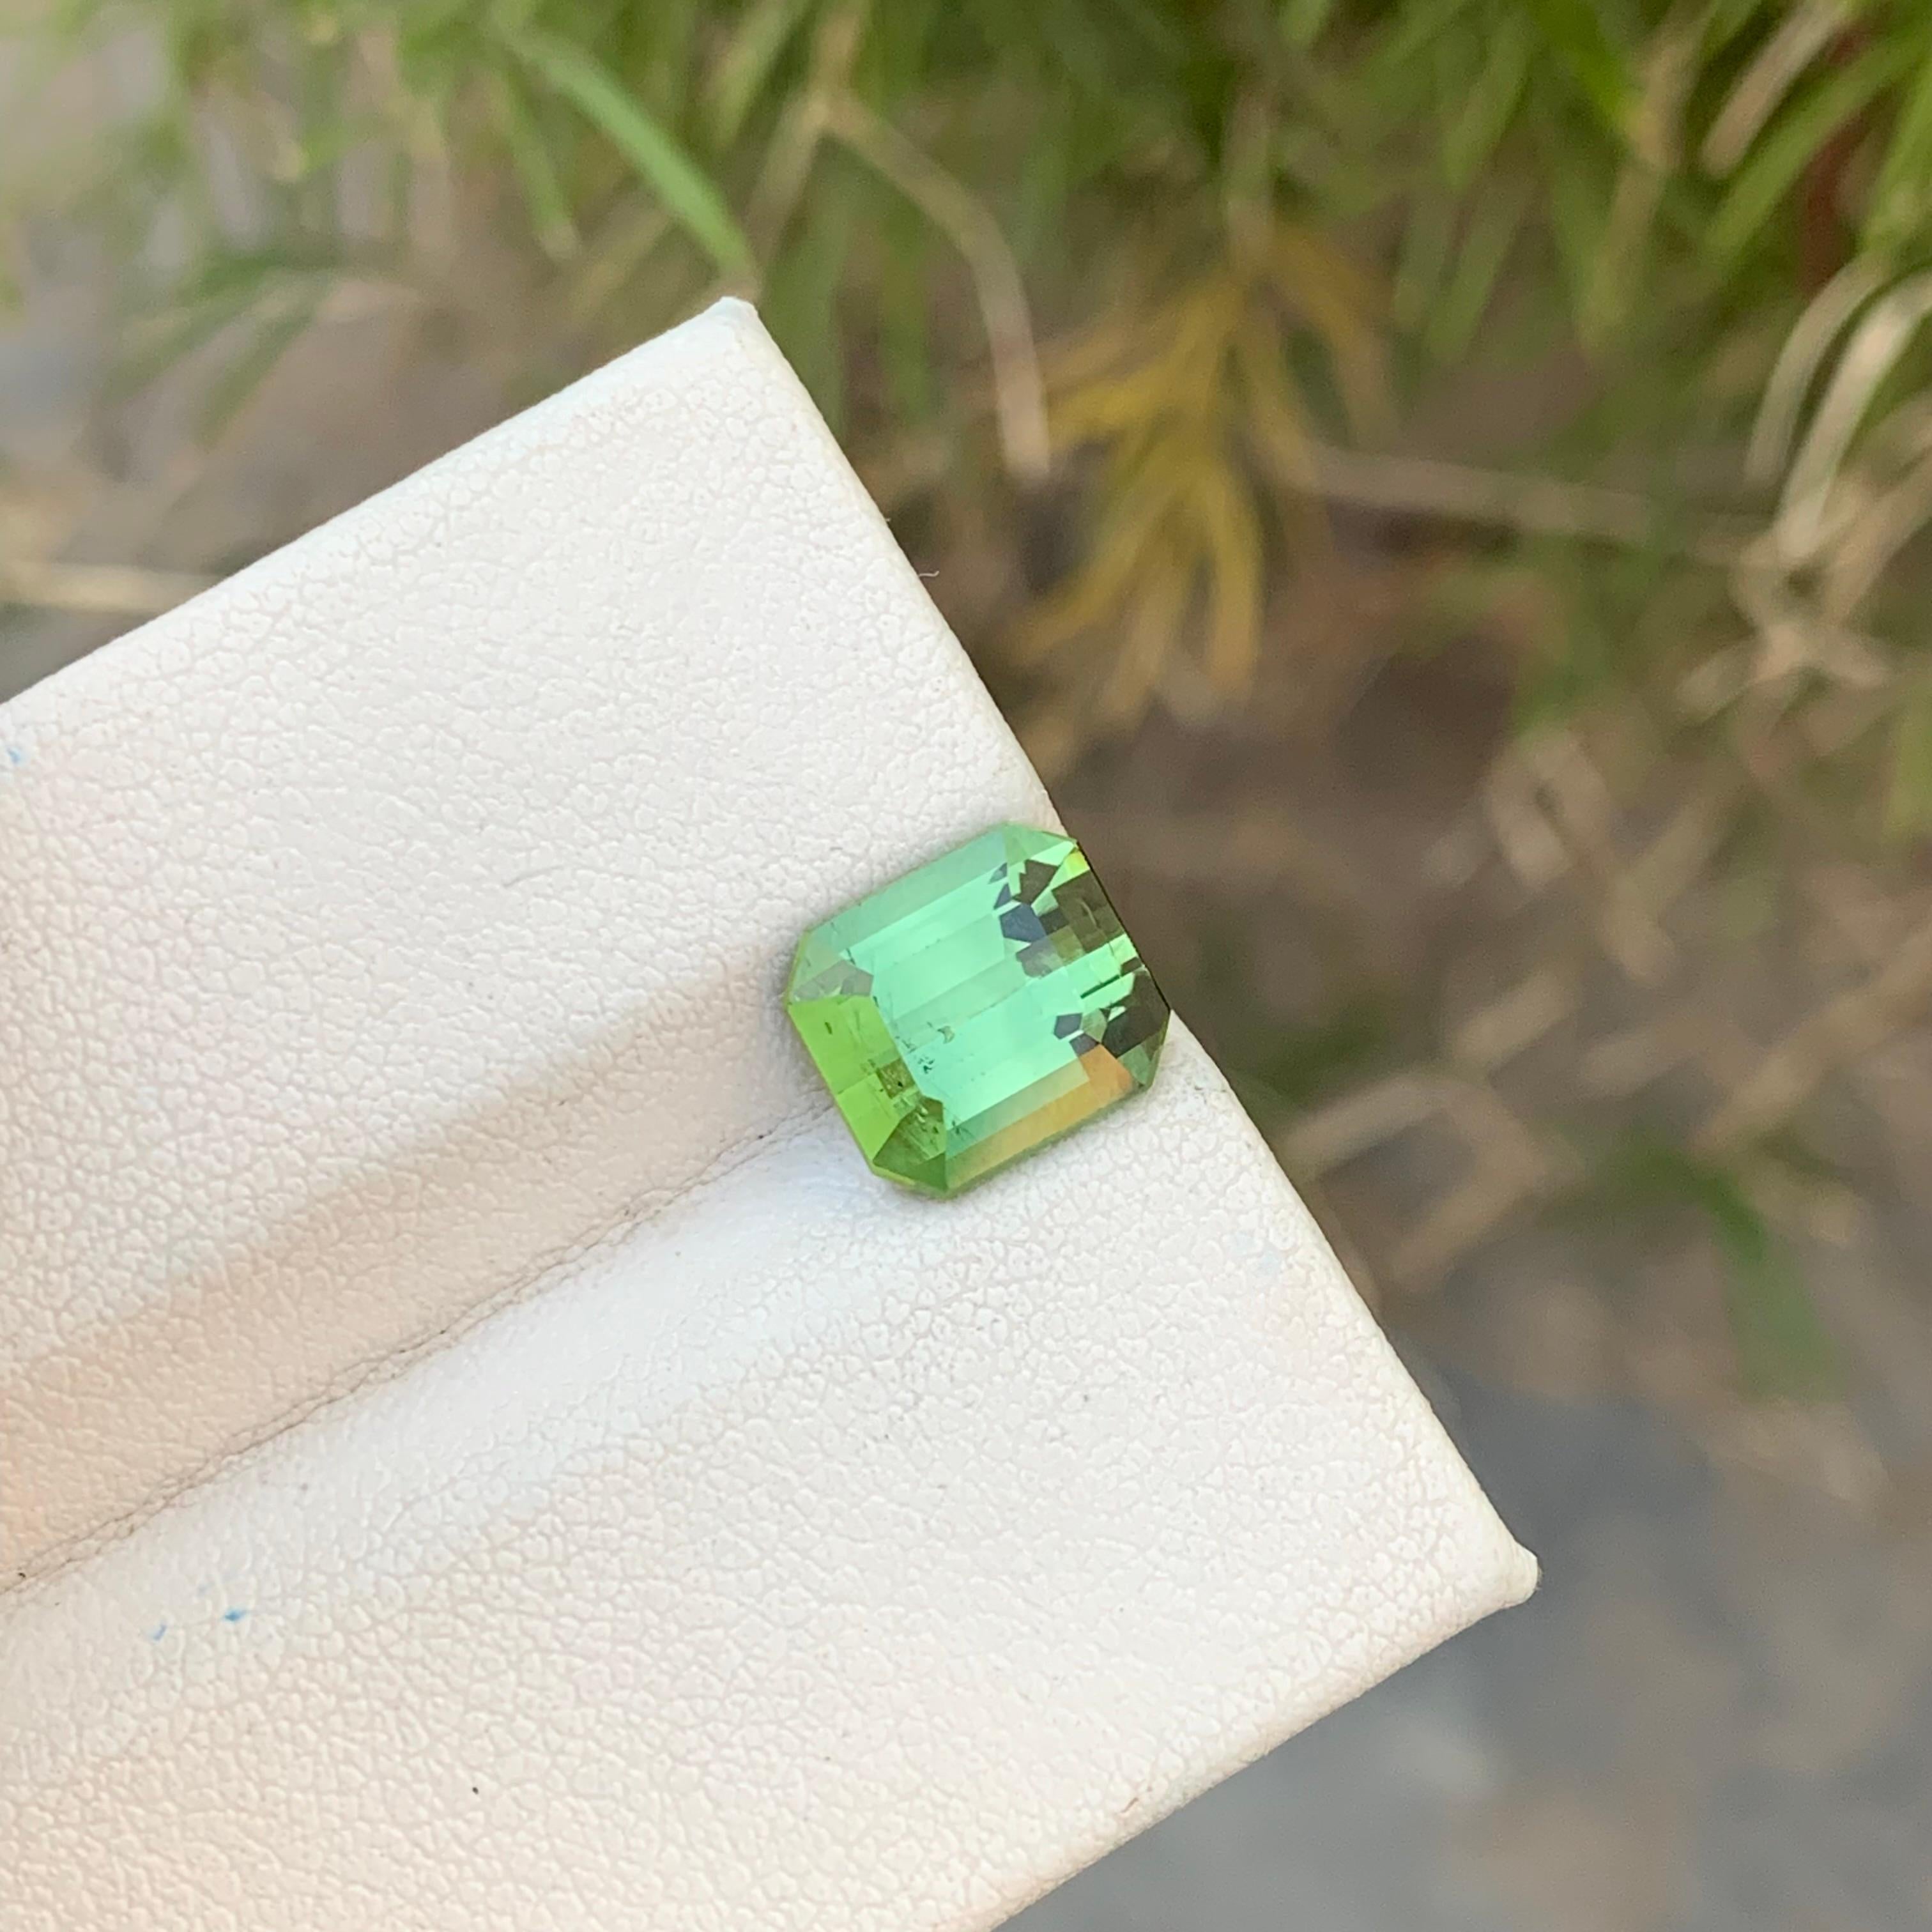 Loose Mint Green Tourmaline
Weight: 3.70 Carats
Dimension: 9.3 x 8.3 x 5.7 Mm
Colour: Mint Green
Origin: Afghanistan
Certificate: On Demand
Treatment: Non

Tourmaline is a captivating gemstone known for its remarkable variety of colors, making it a